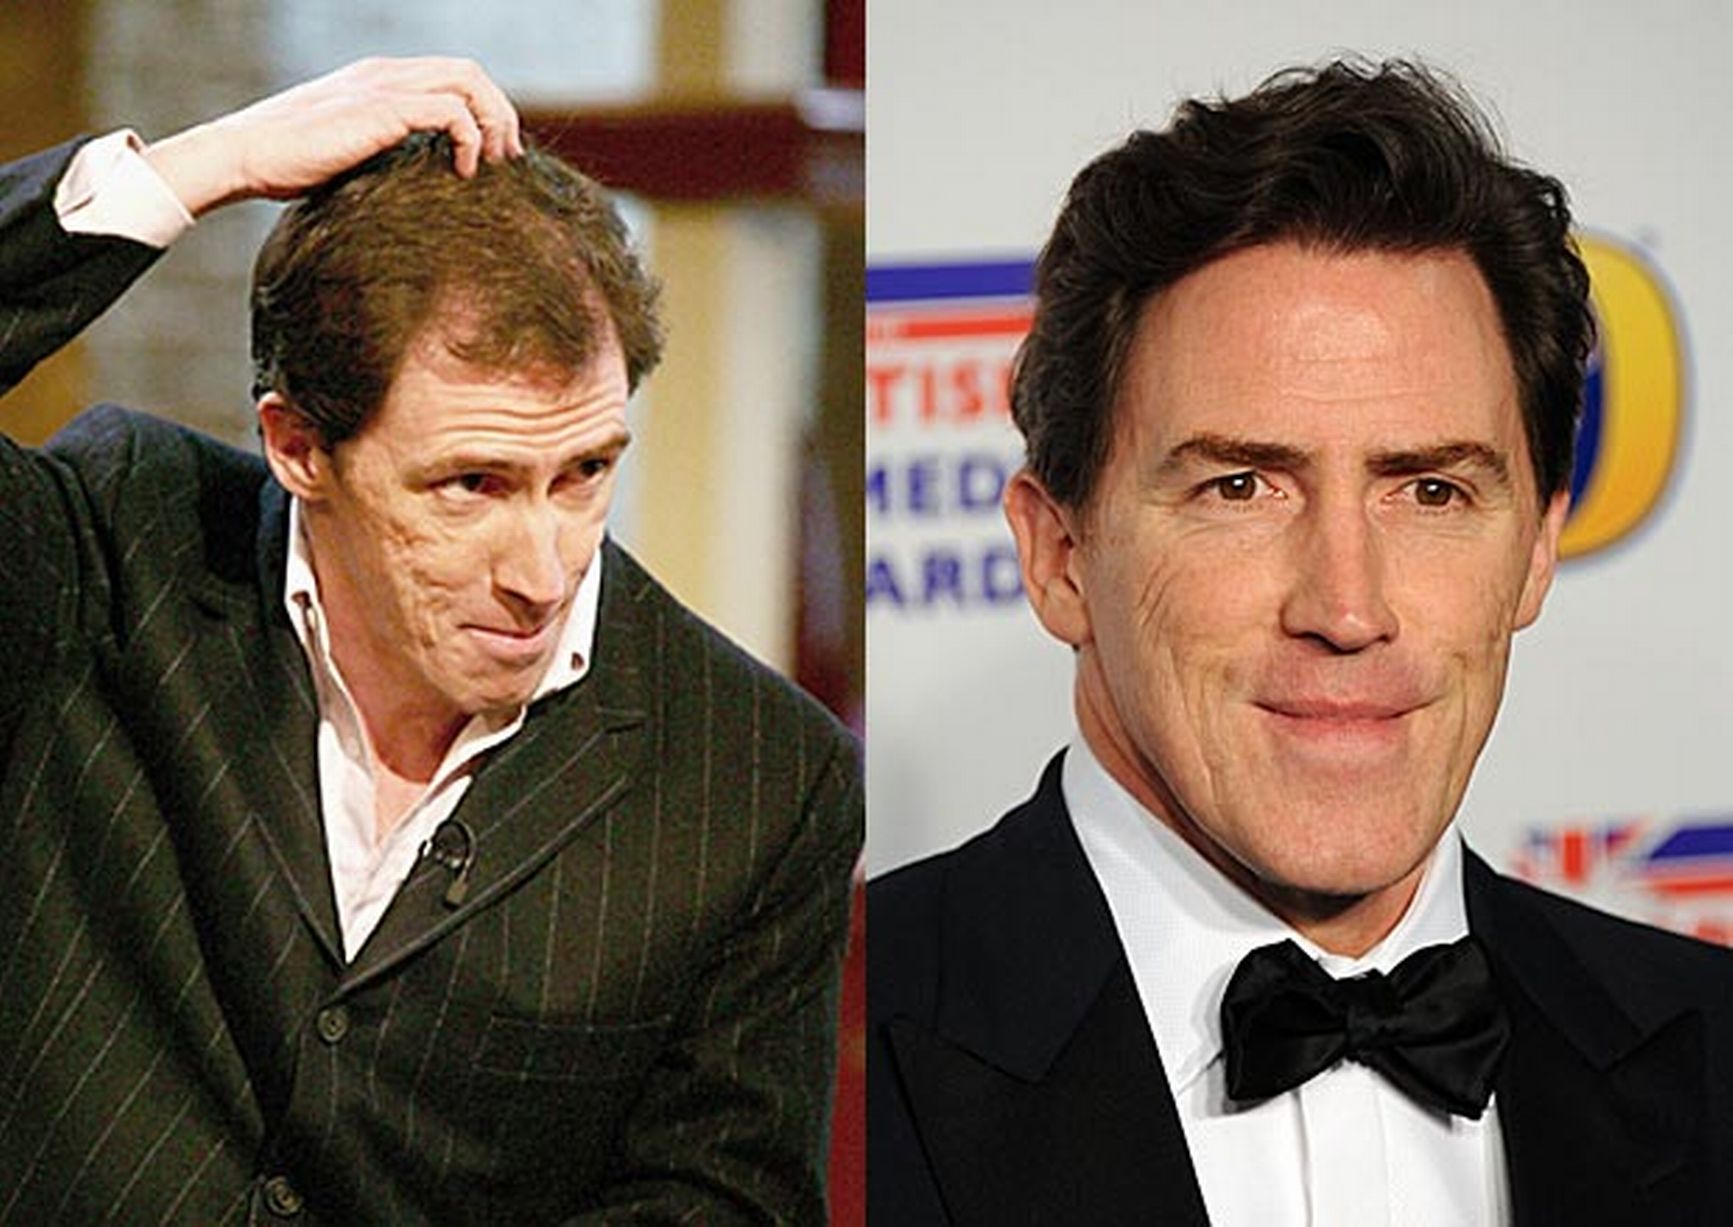 celebrity hair transplant before and after rob brydon